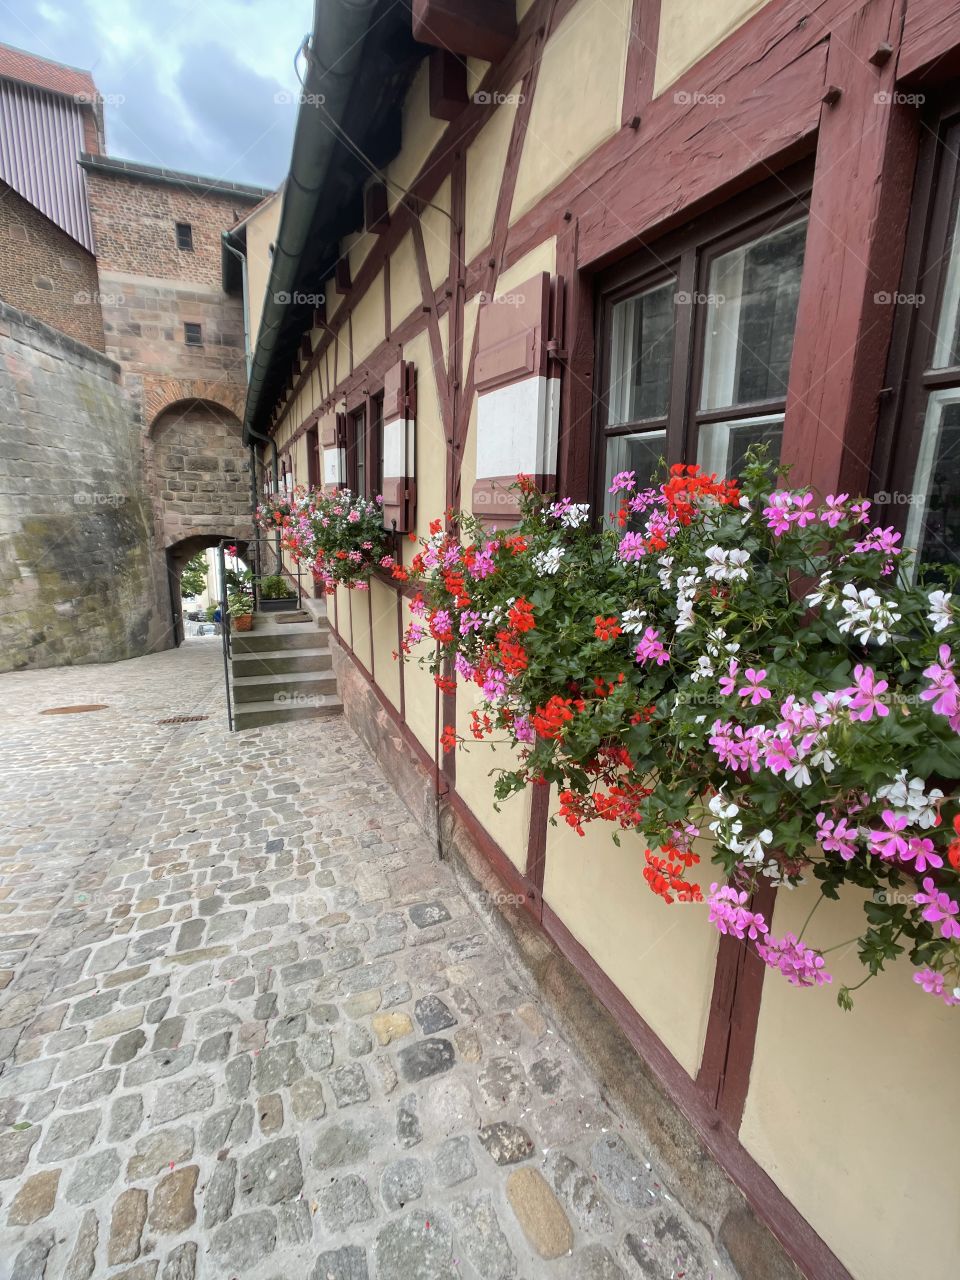 Windows with flowers next to the Nurmberg castle, Germany